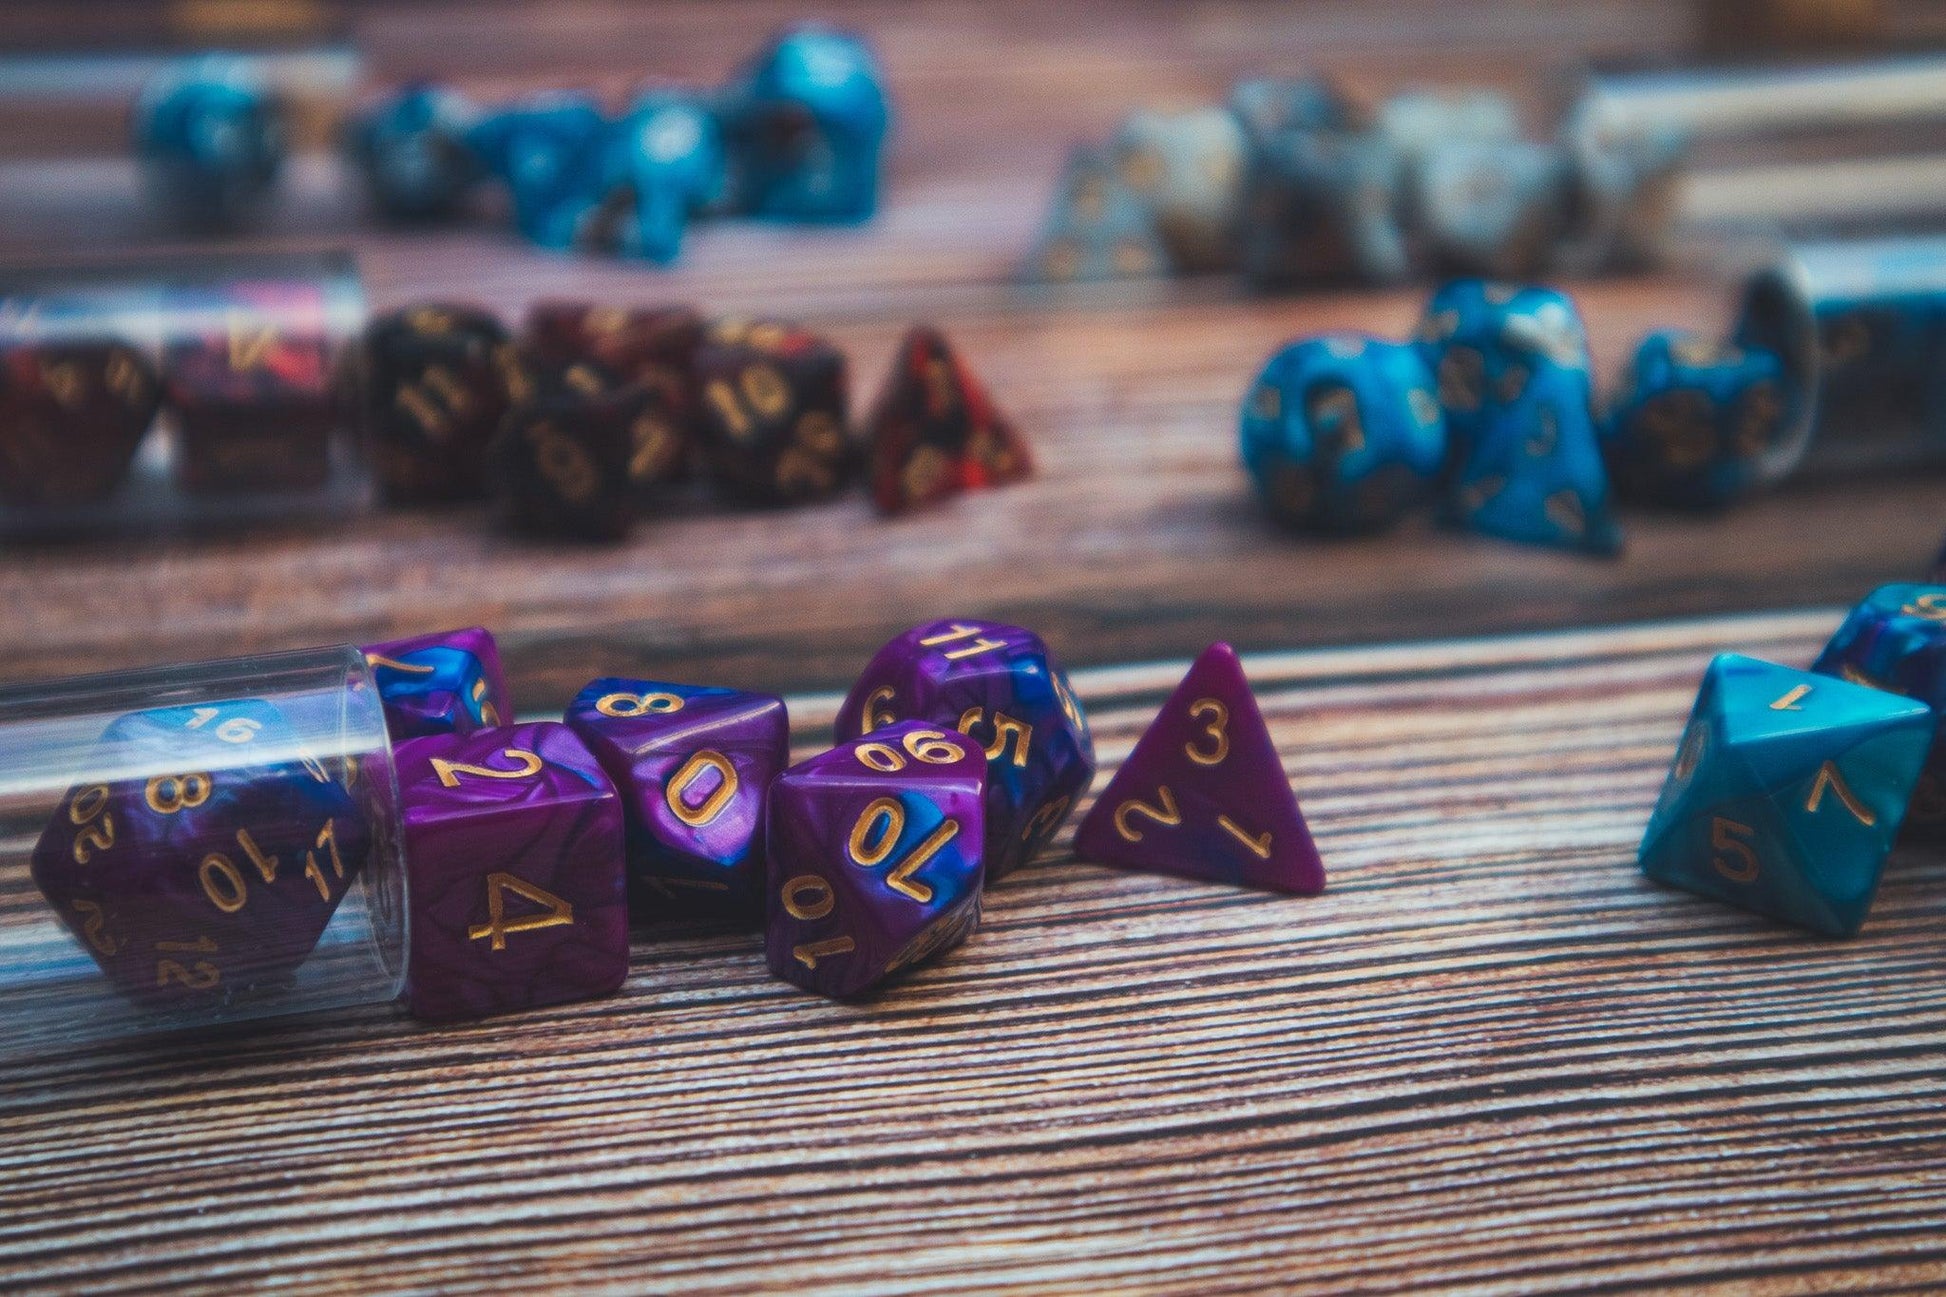 Lunar Sorcery Polyhedral dice set - Soft edge - The Flaming Feather & Flaming Filament